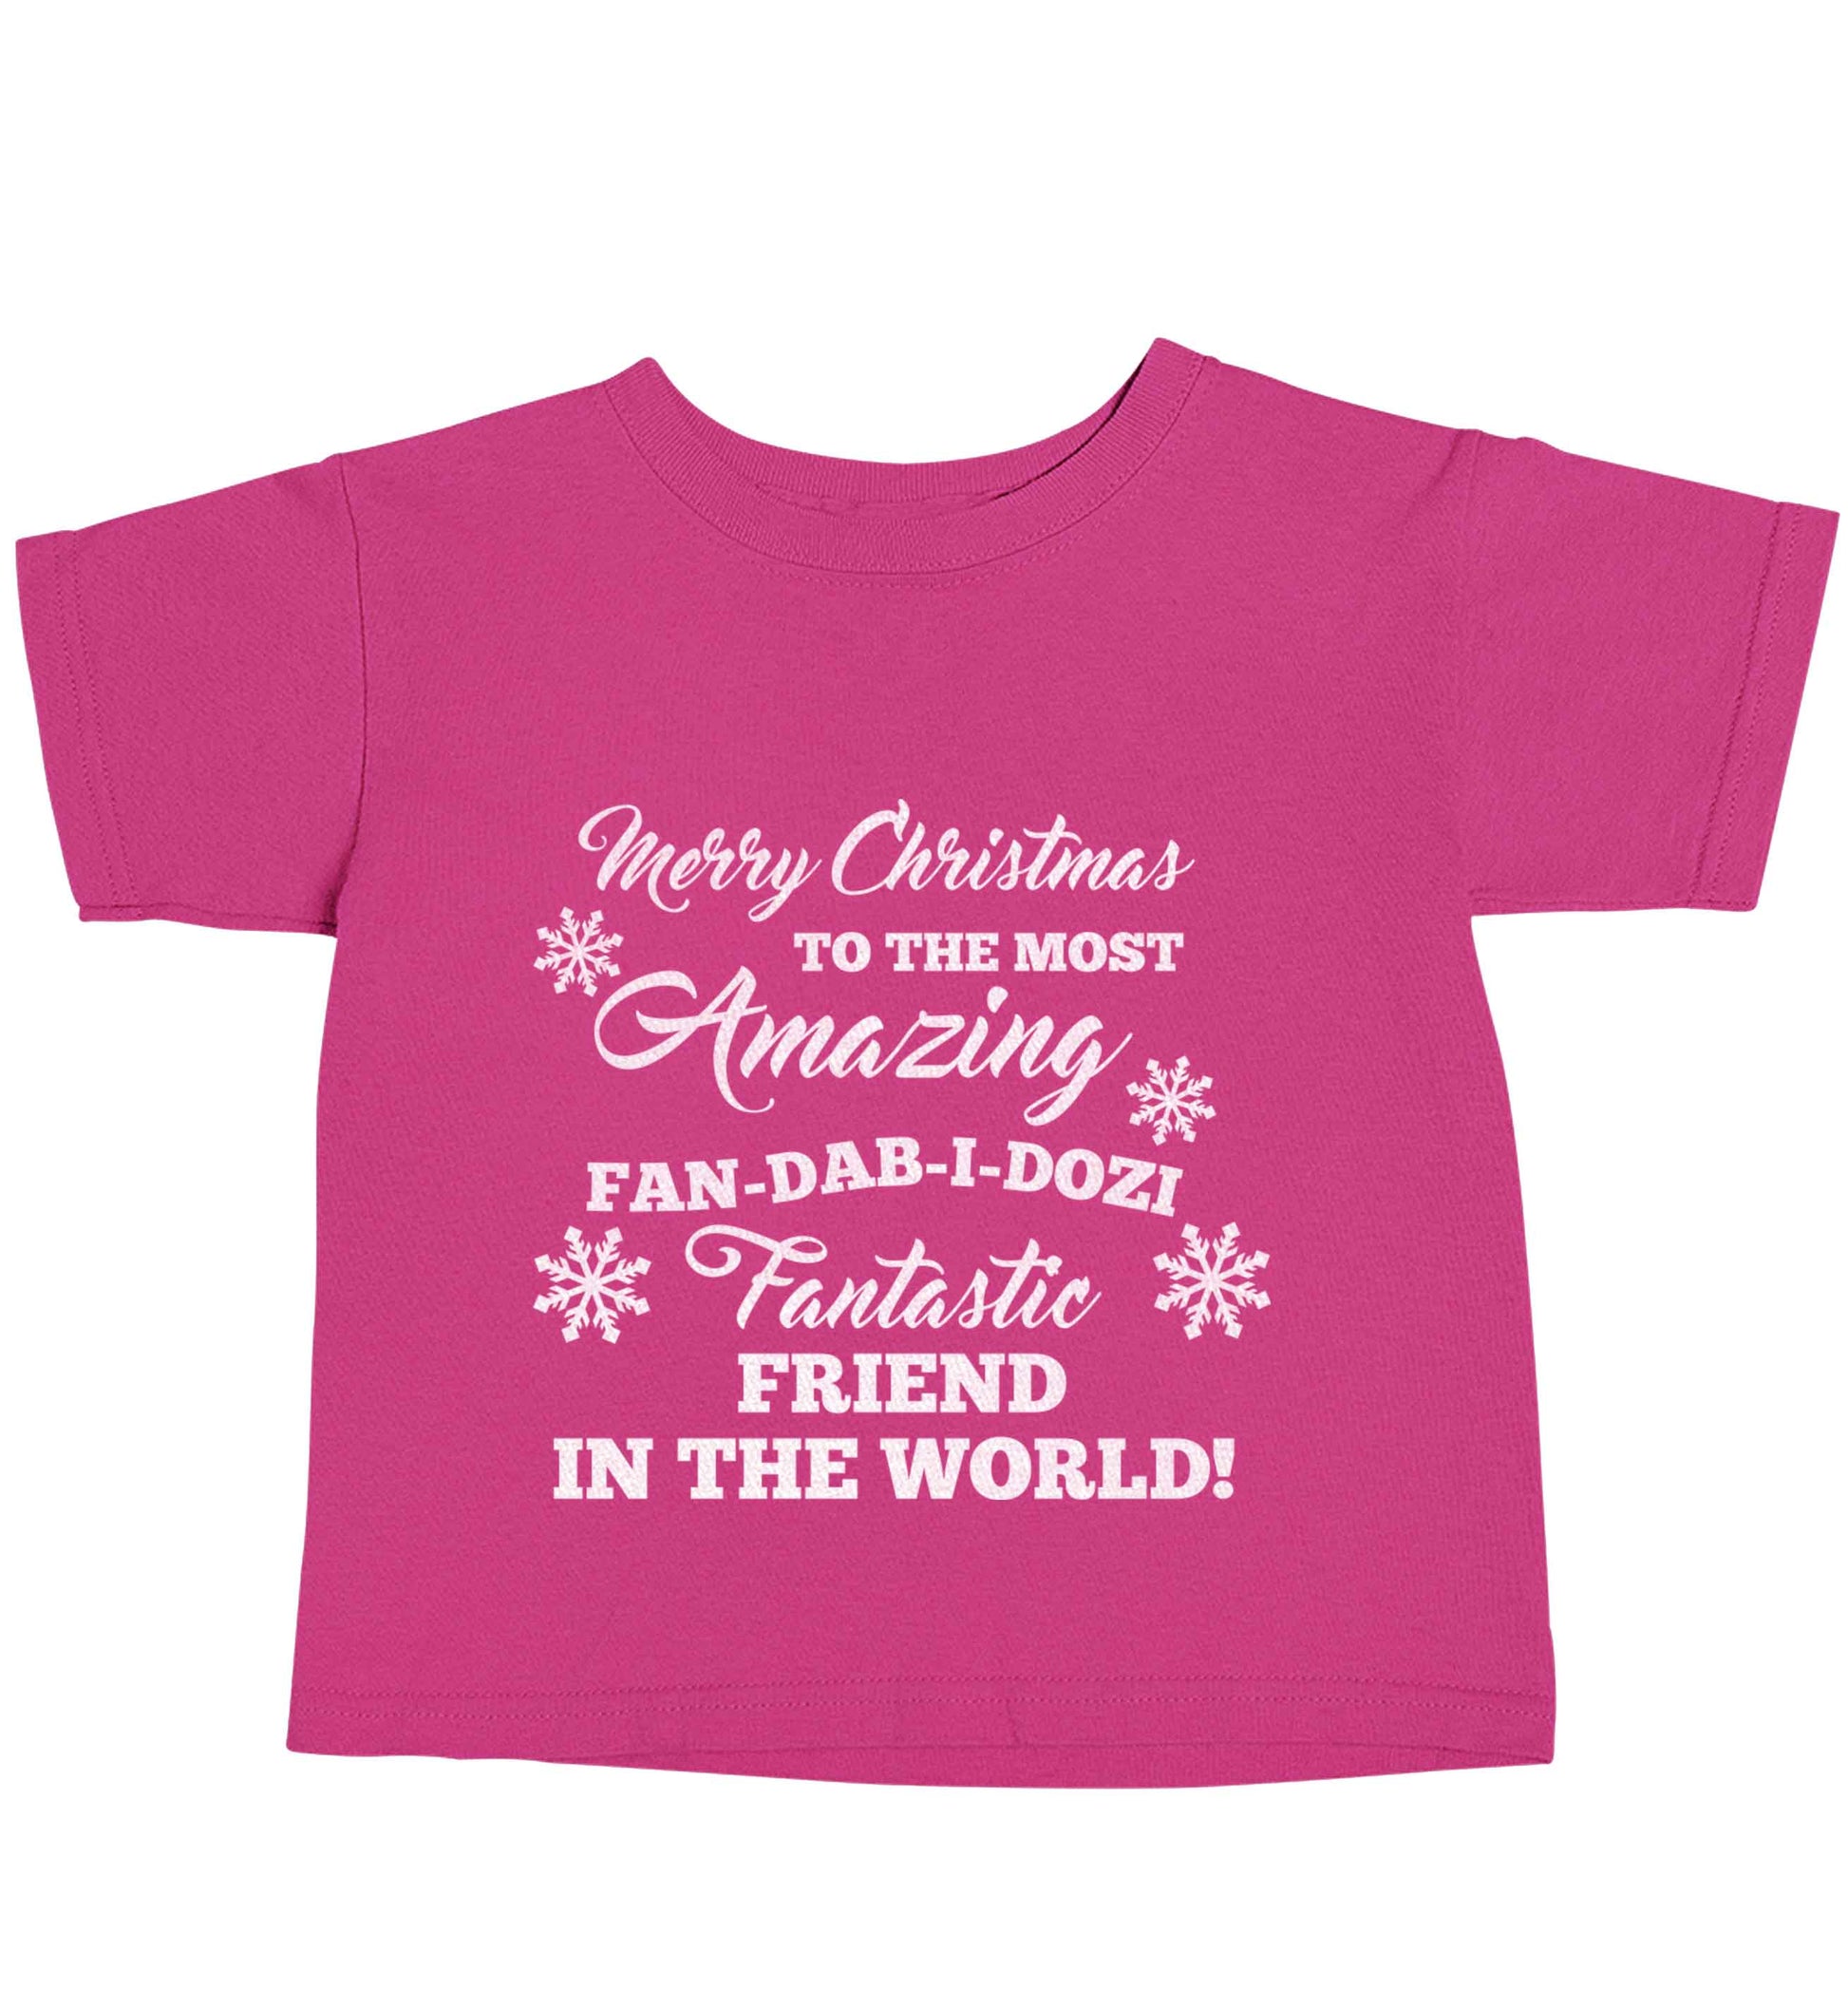 Merry Christmas to the most amazing fan-dab-i-dozi fantasic friend in the world pink baby toddler Tshirt 2 Years